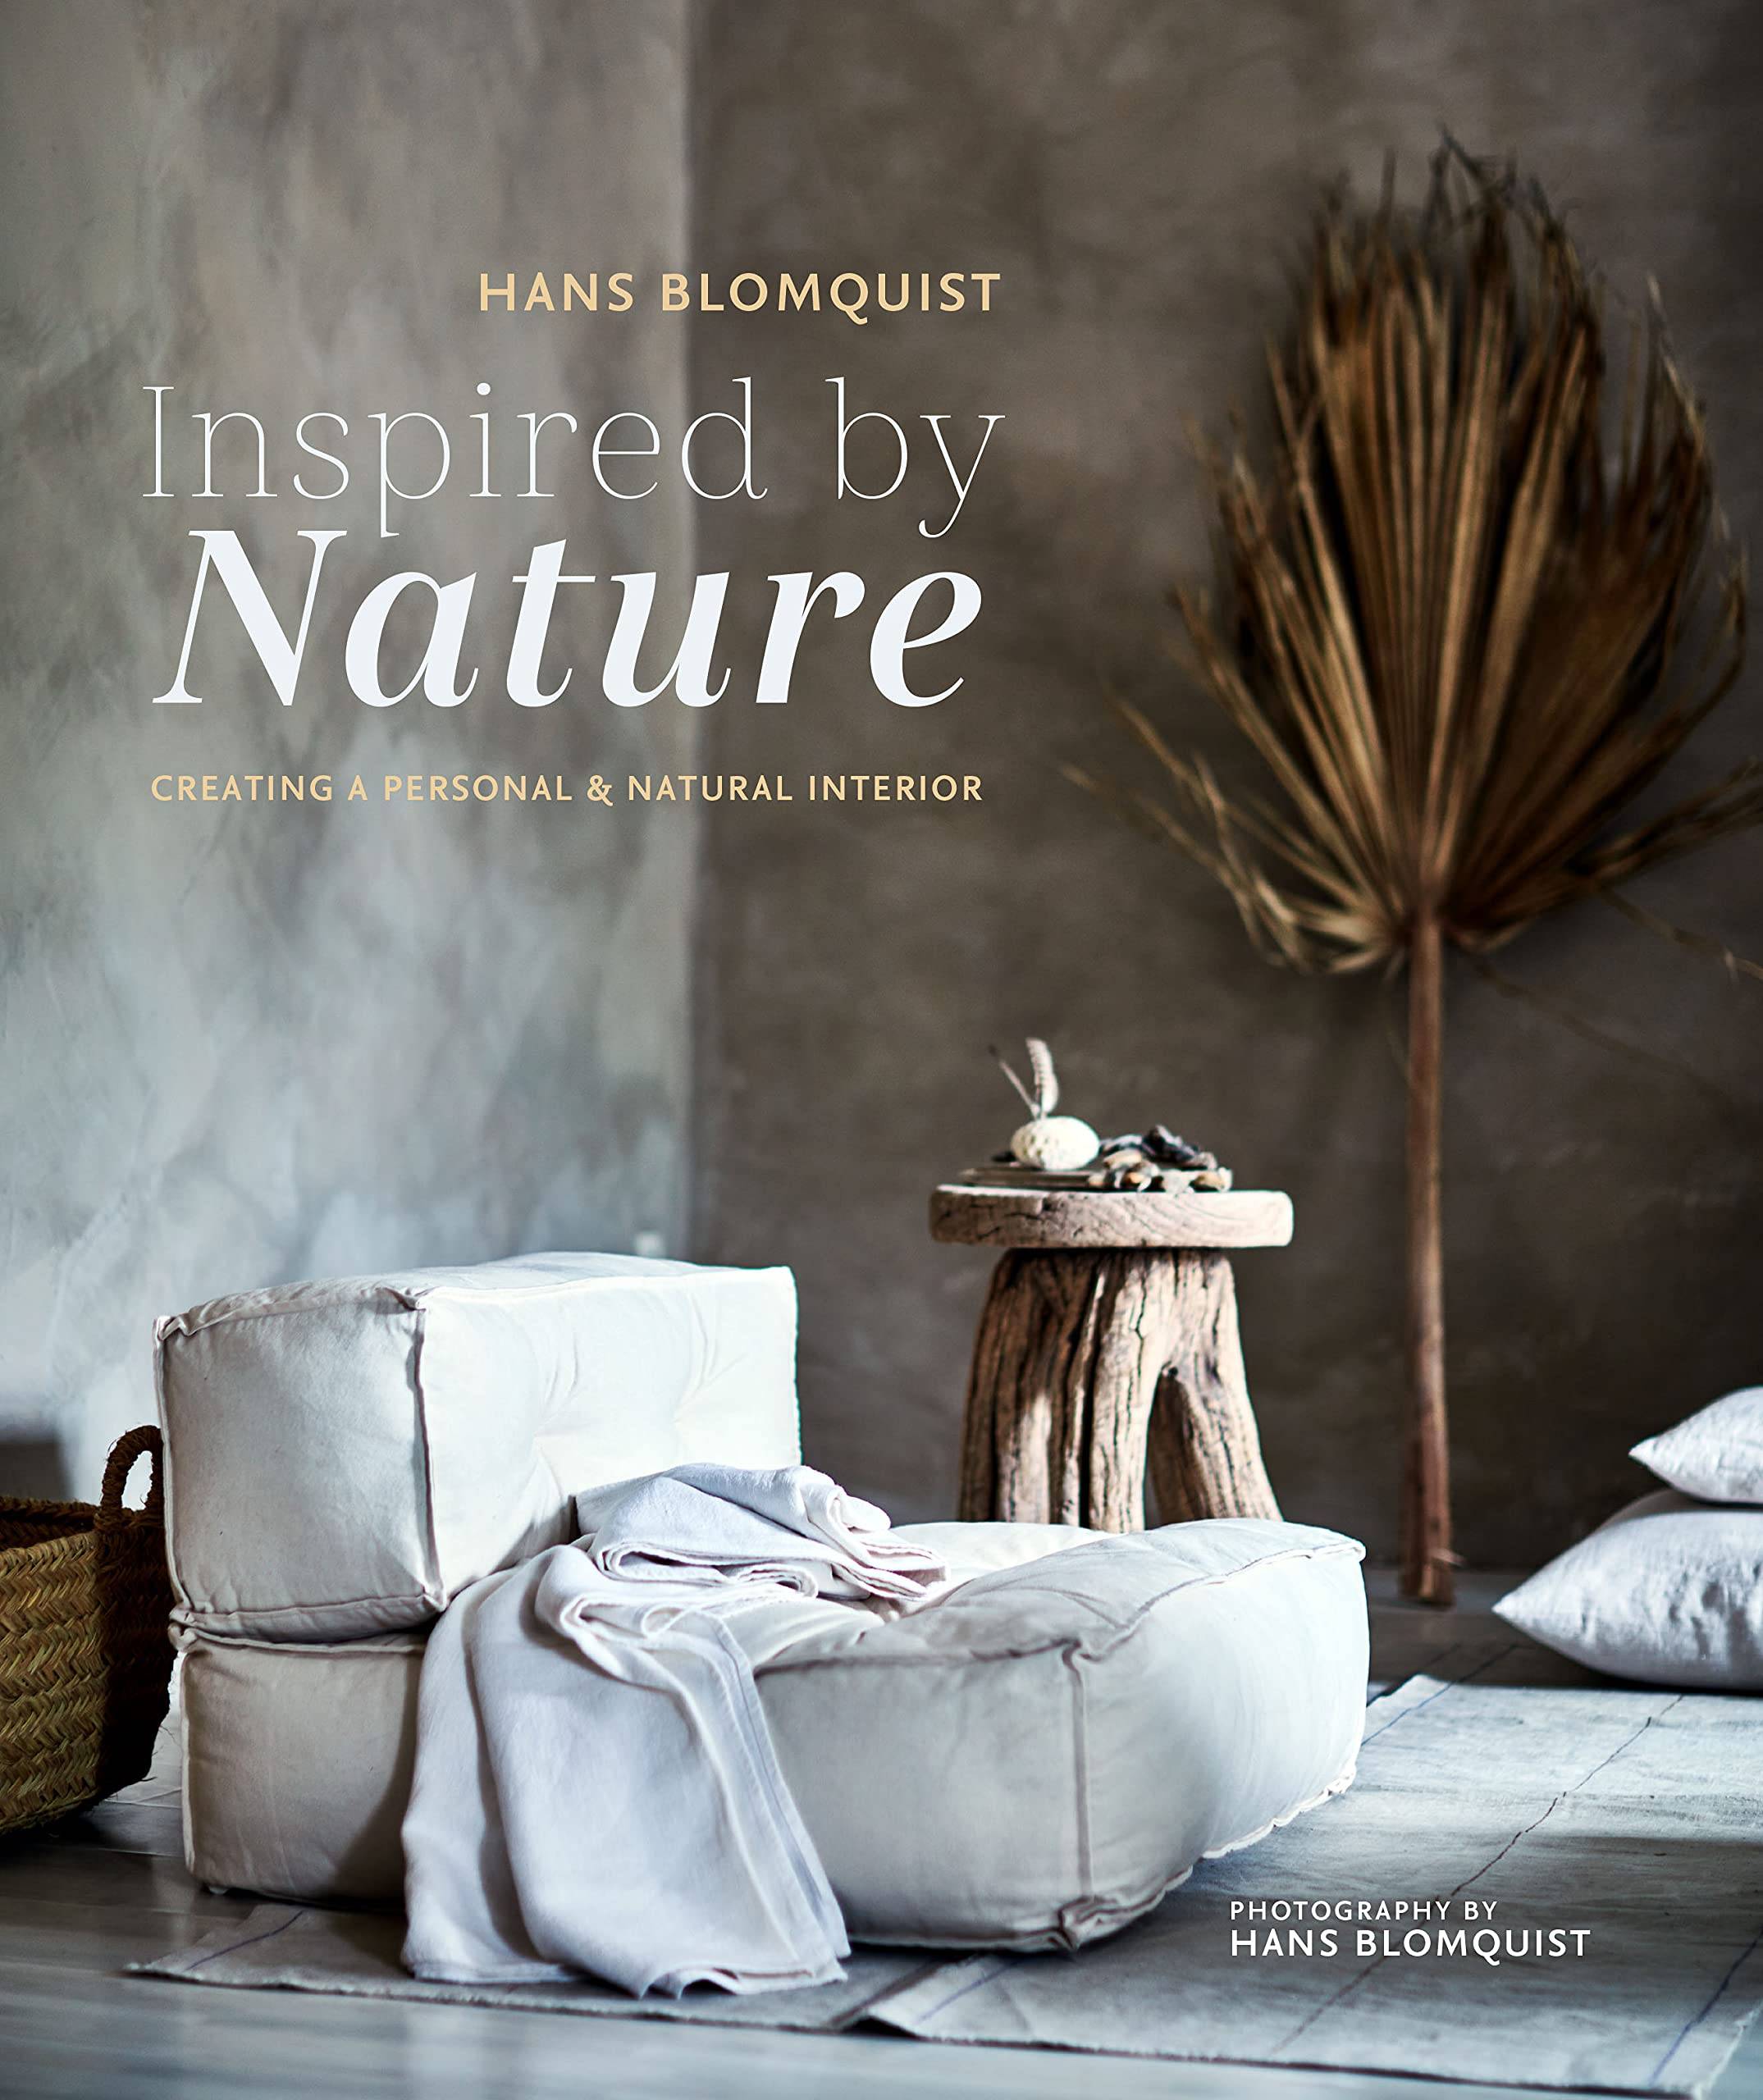 Inspired-by-Nature-Creating-a-personal-and-natural-interior-By-Hans-Blomquist-17248